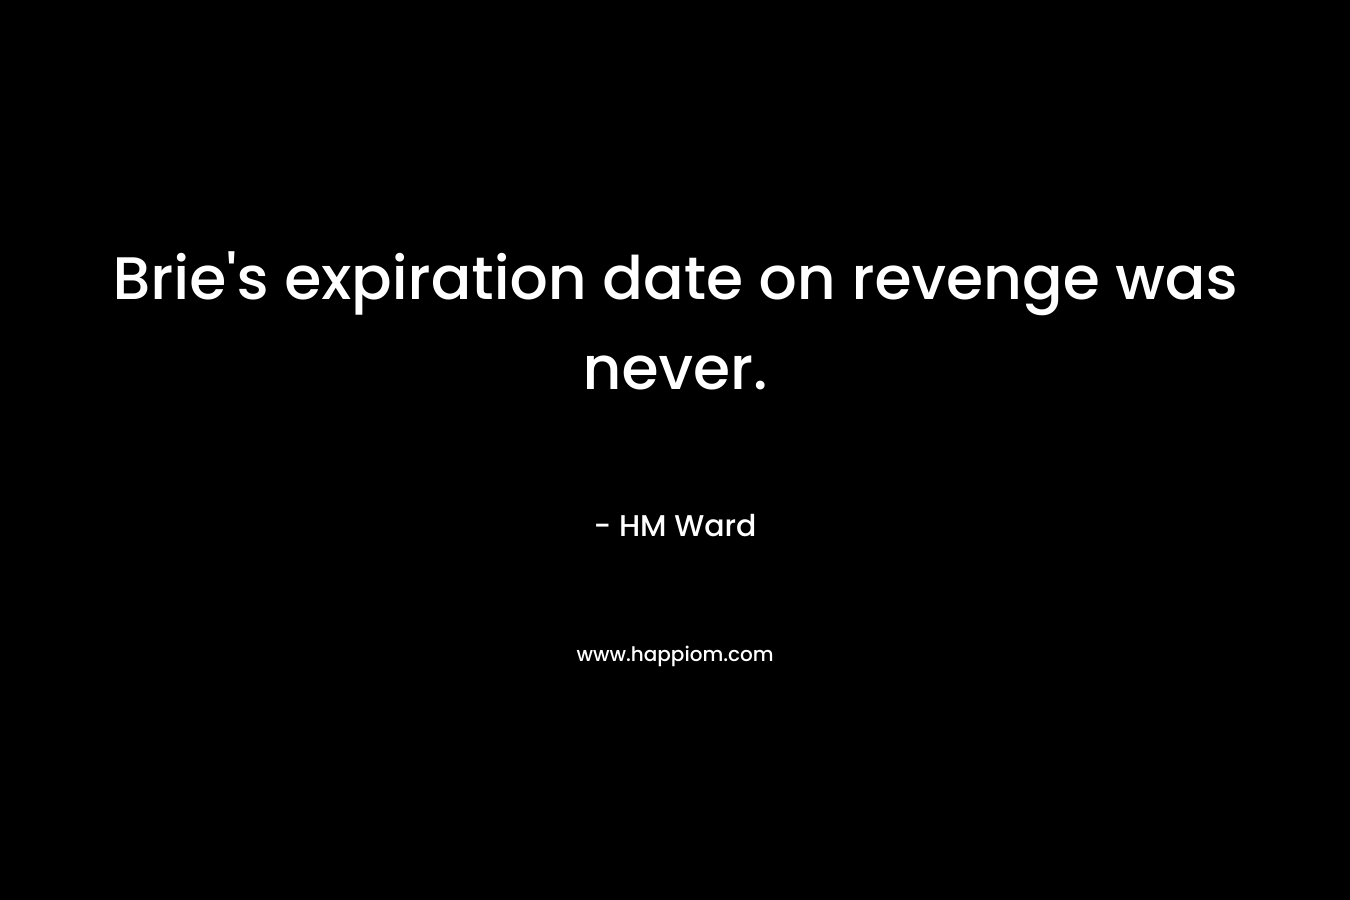 Brie’s expiration date on revenge was never. – HM Ward